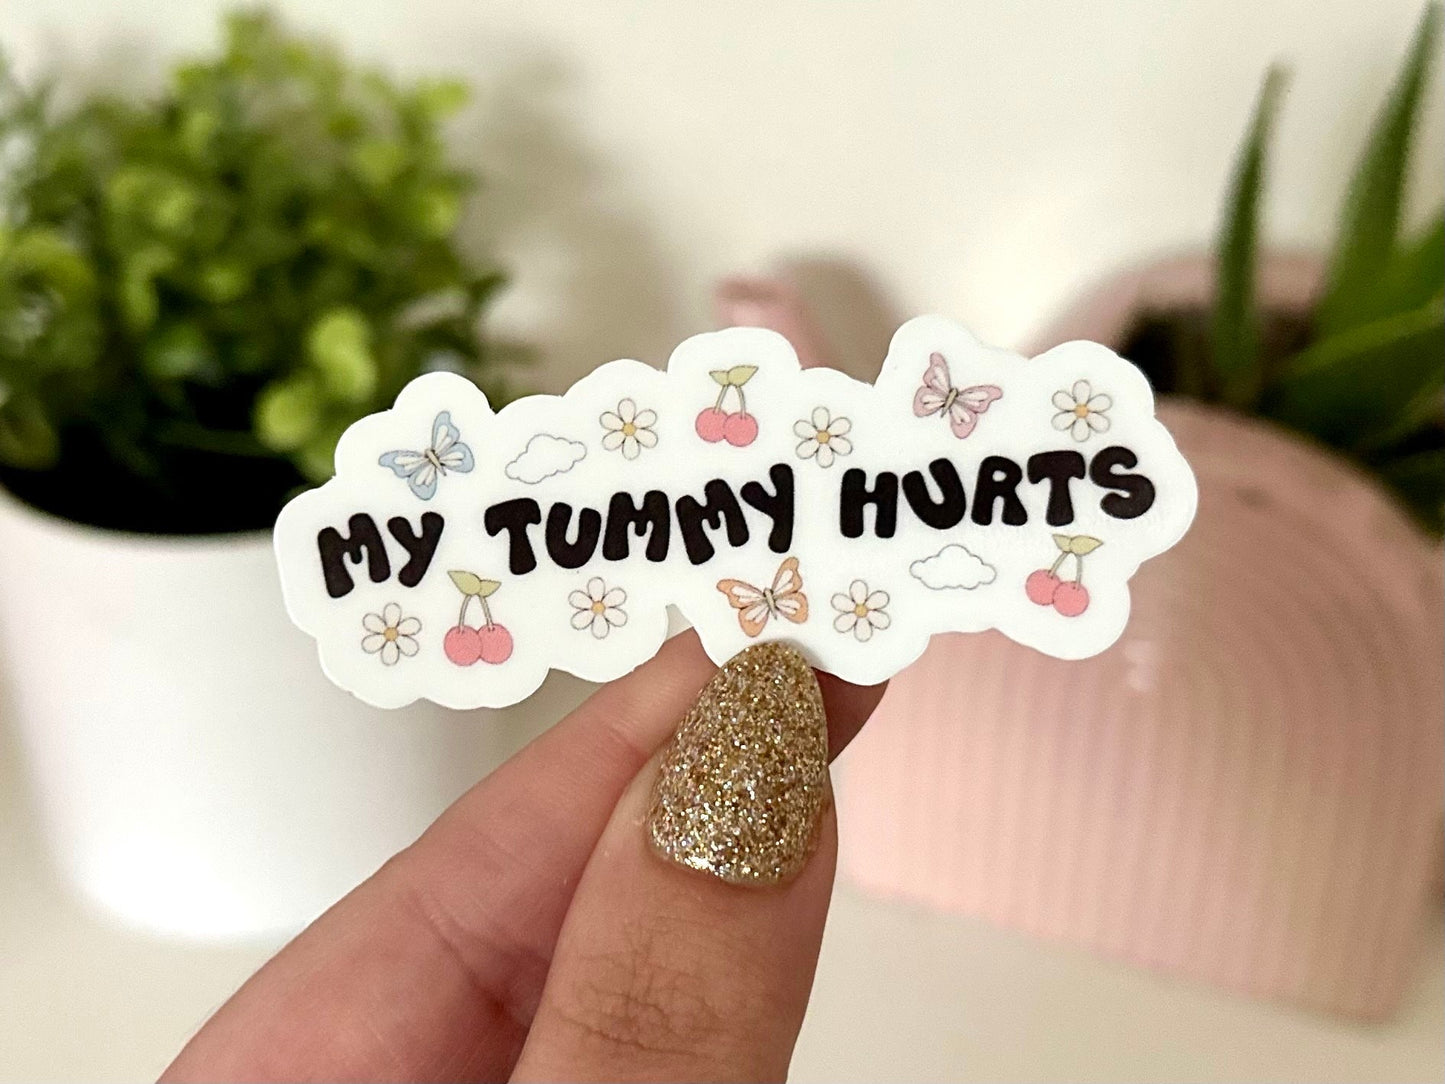 My Tummy Hurts Waterproof Sticker, Funny Gifts, Succulent Stickers, Laptop, IBS Design, Tumblr Decal, Retro, Groovy